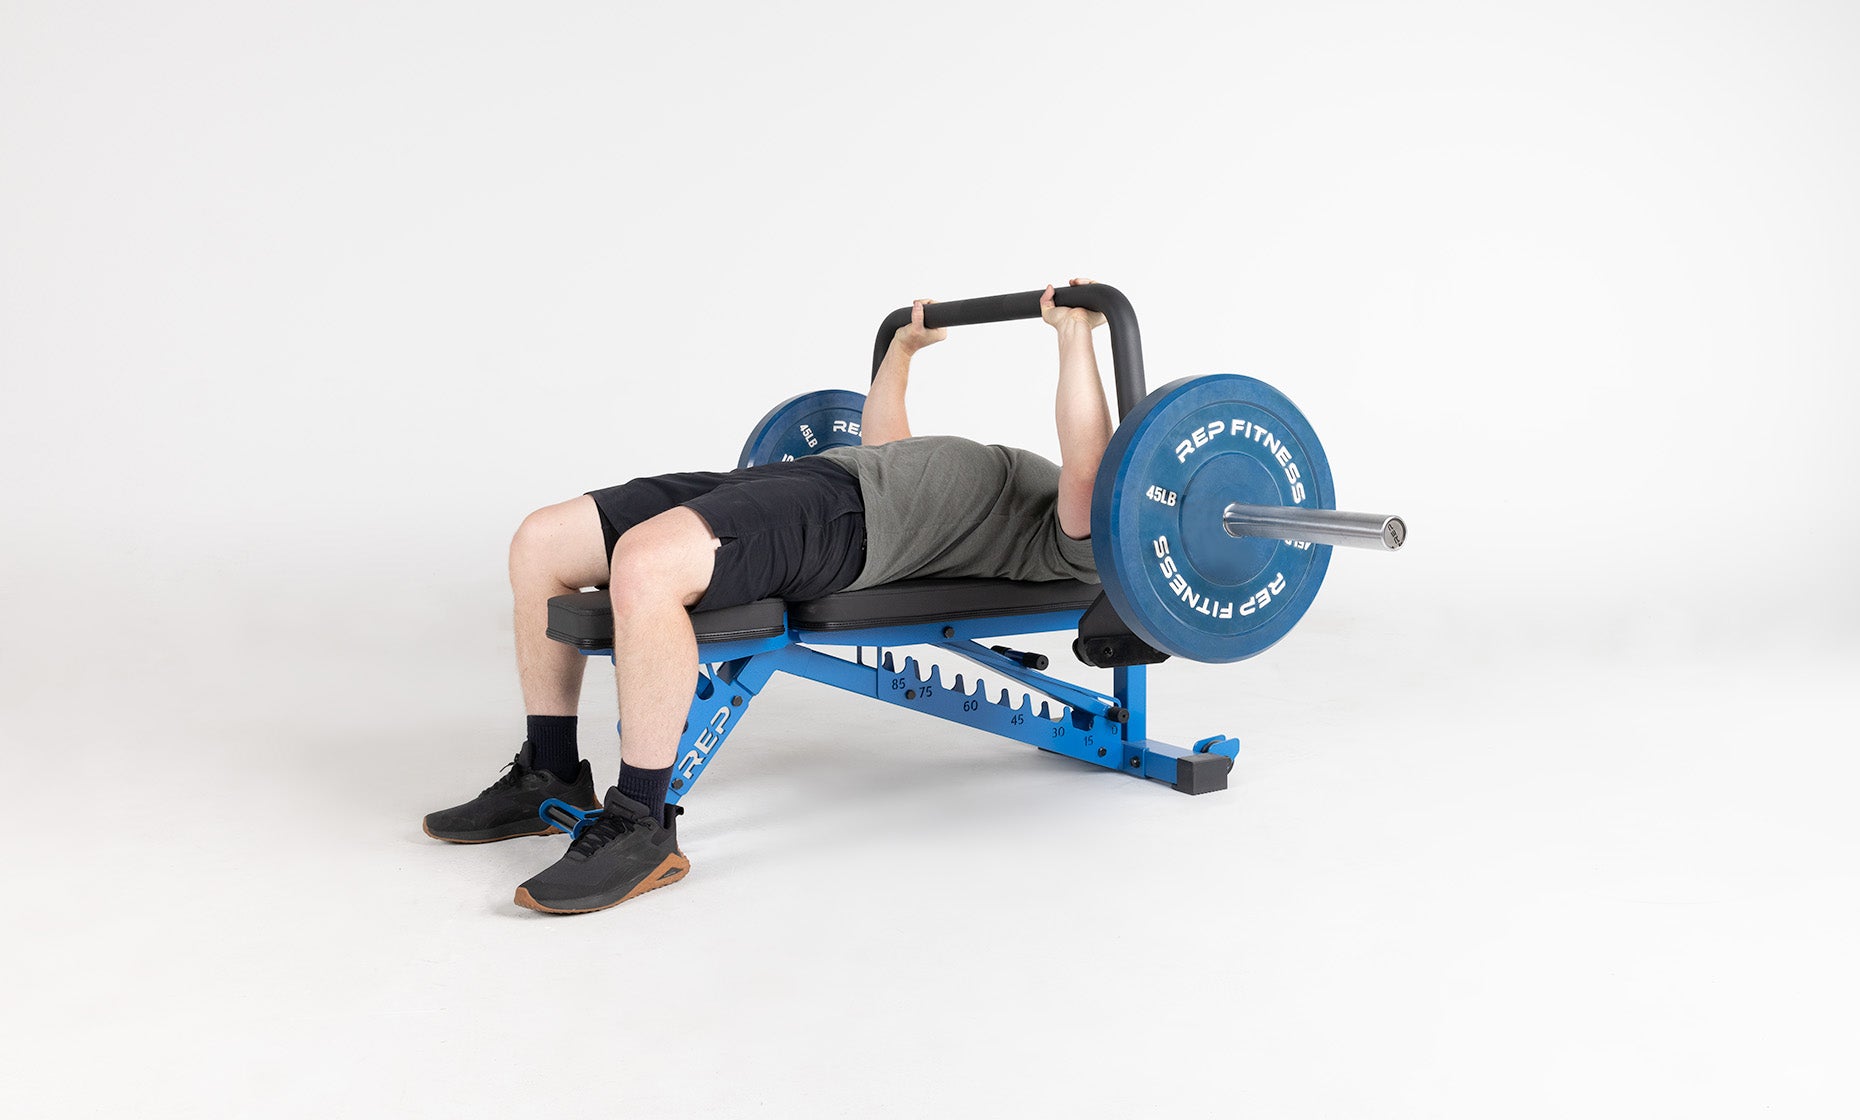 Lifter lying on a weight bench and performing a bench press using the Open Trap Bar without handles attached.